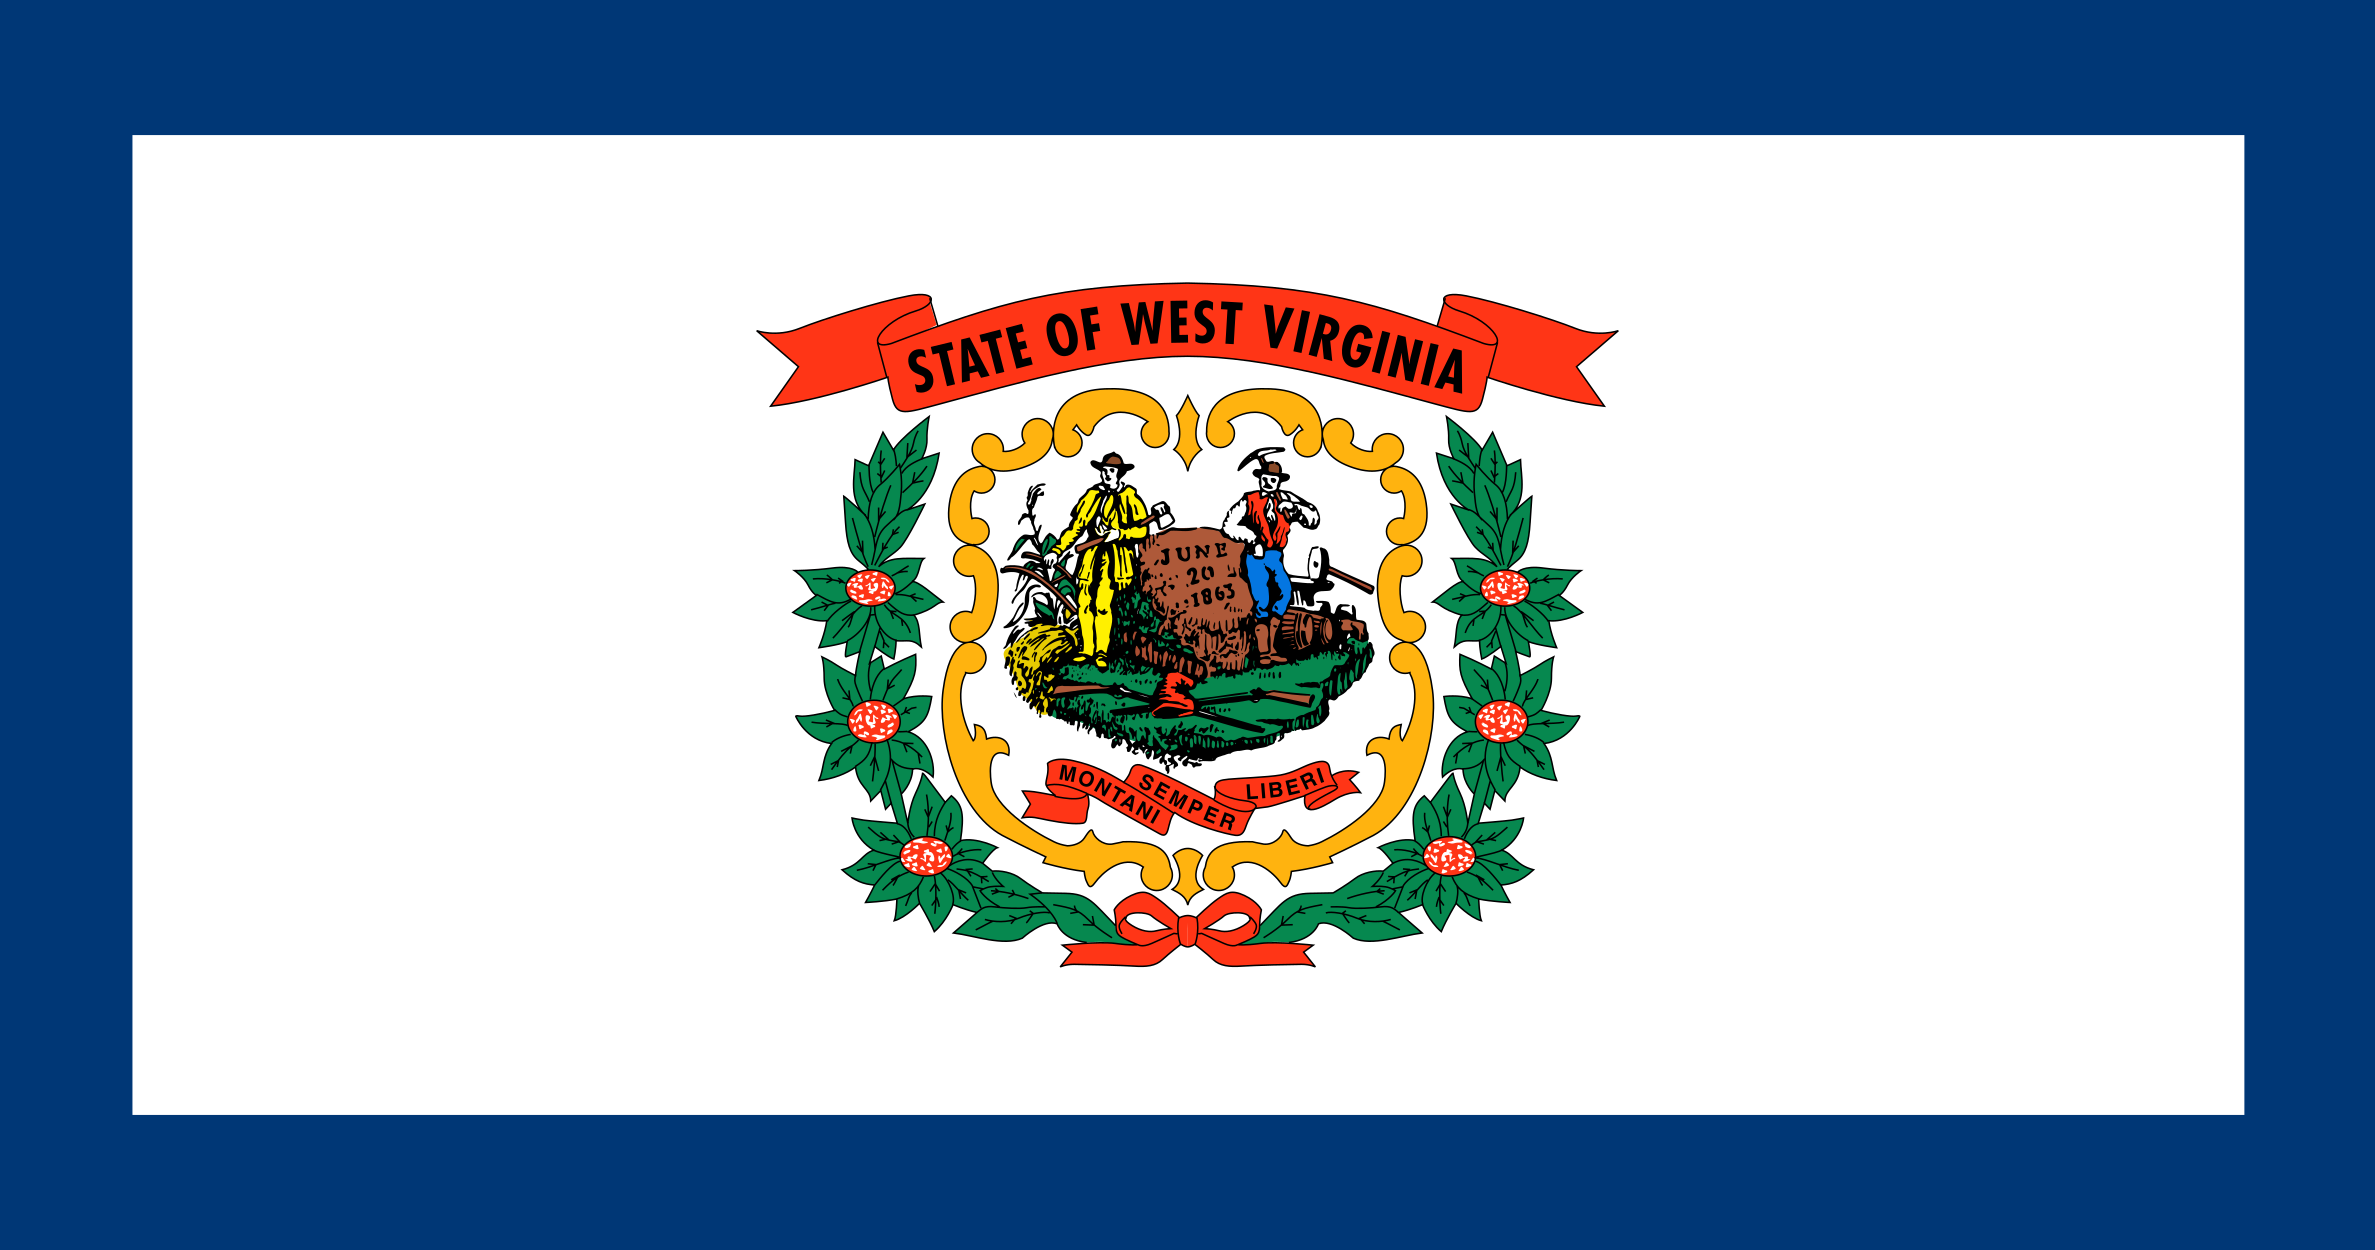 Free West Virginia Flag Images: AI, EPS, GIF, JPG, PDF, PNG, SVG and more!